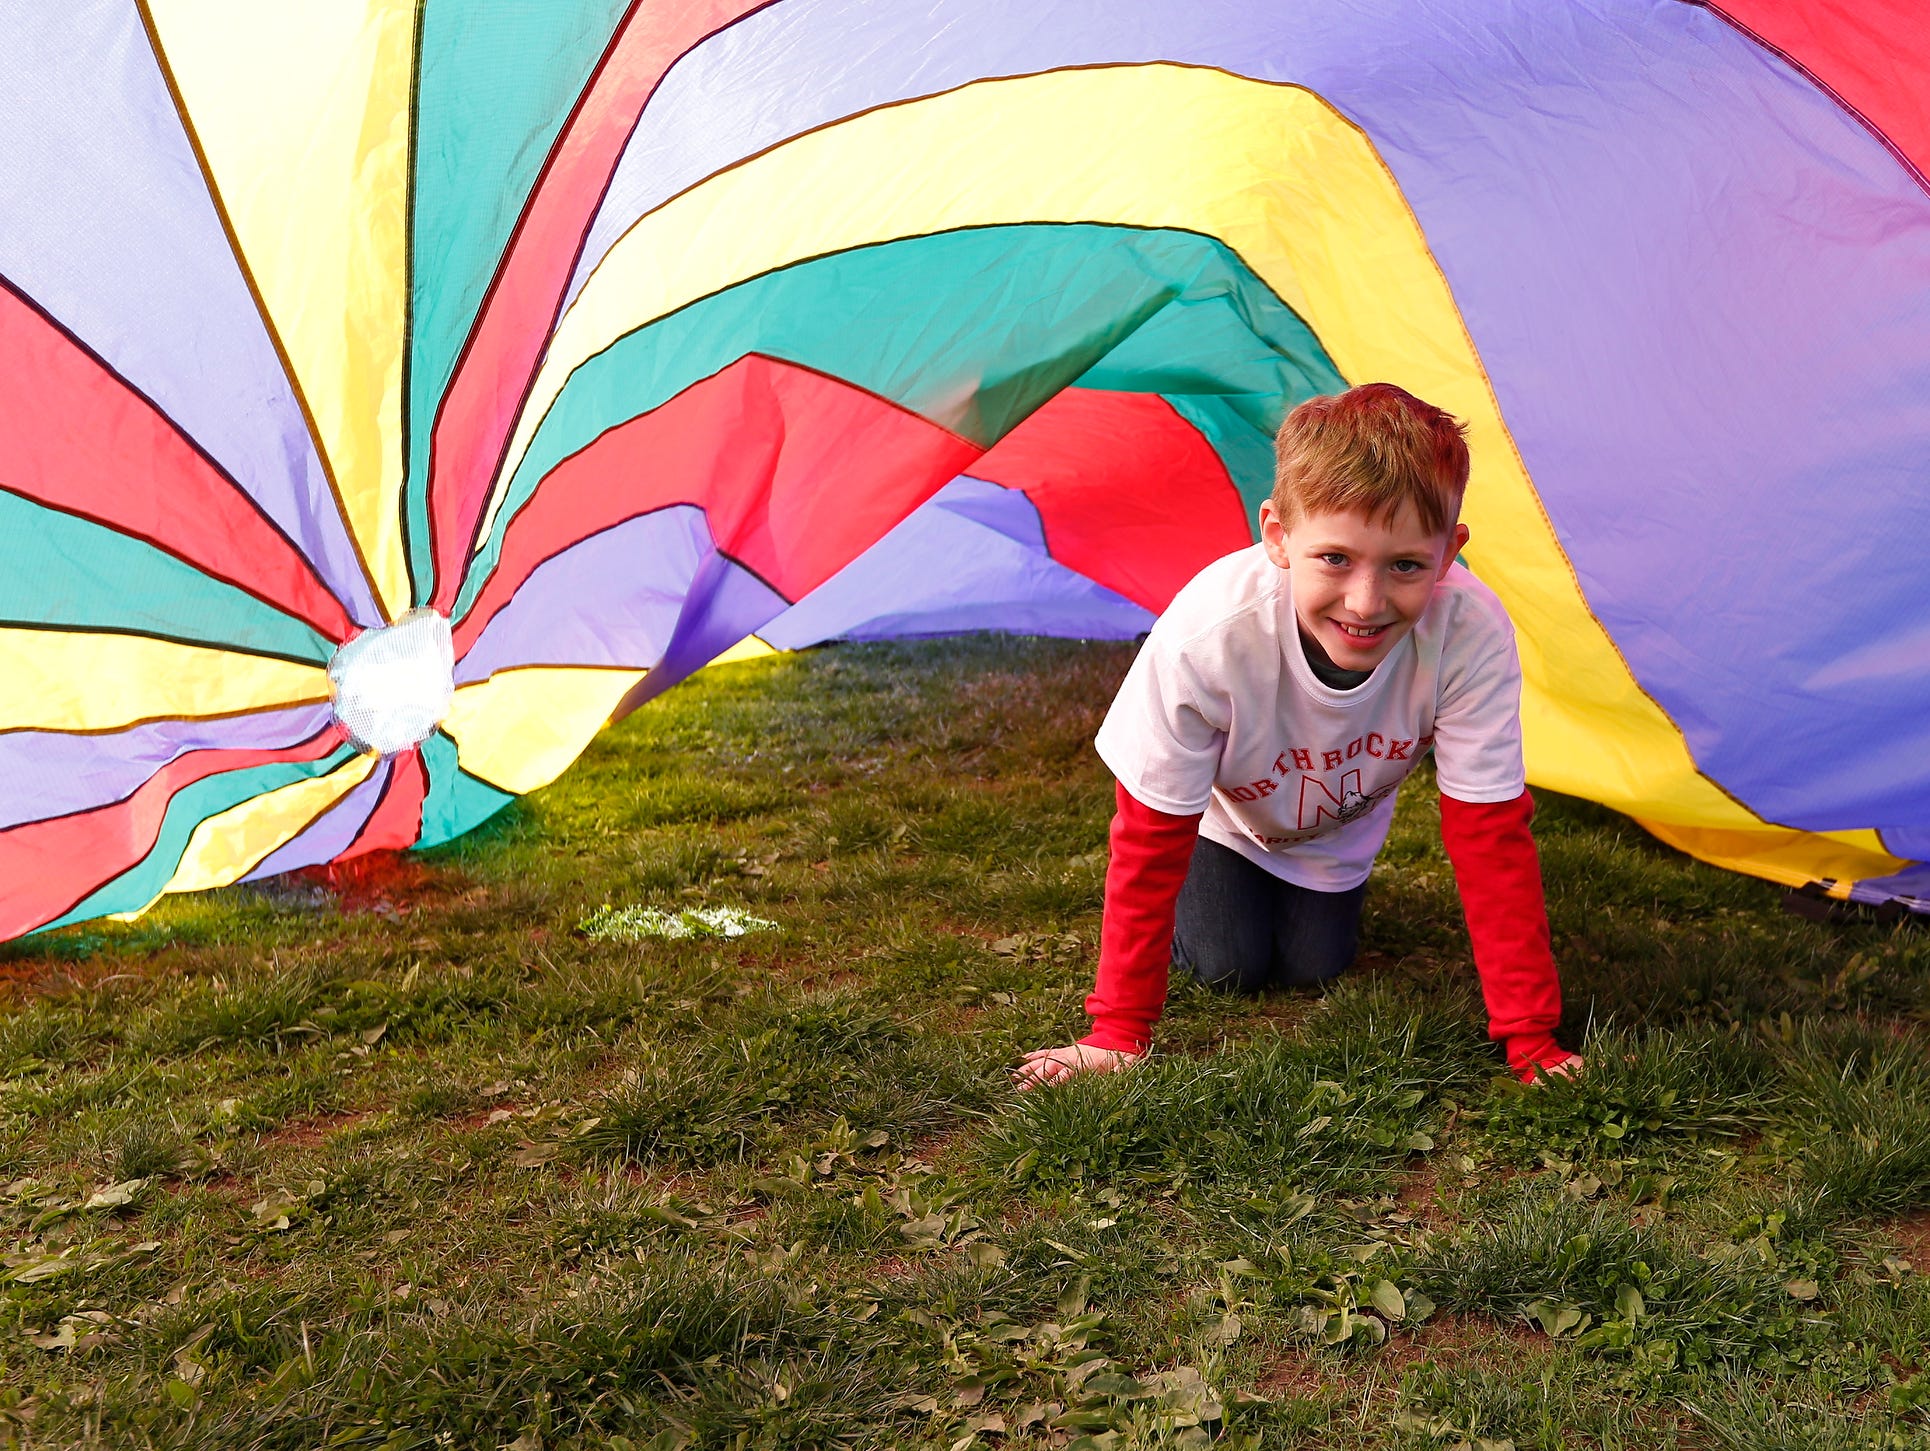 Liam McCaffrey, 8, from Stony Point crawls under a rainbow parachute at the second annual "Sports Day for Charity" event at North Rockland High School in Thiells on Saturday, April 30, 2016.